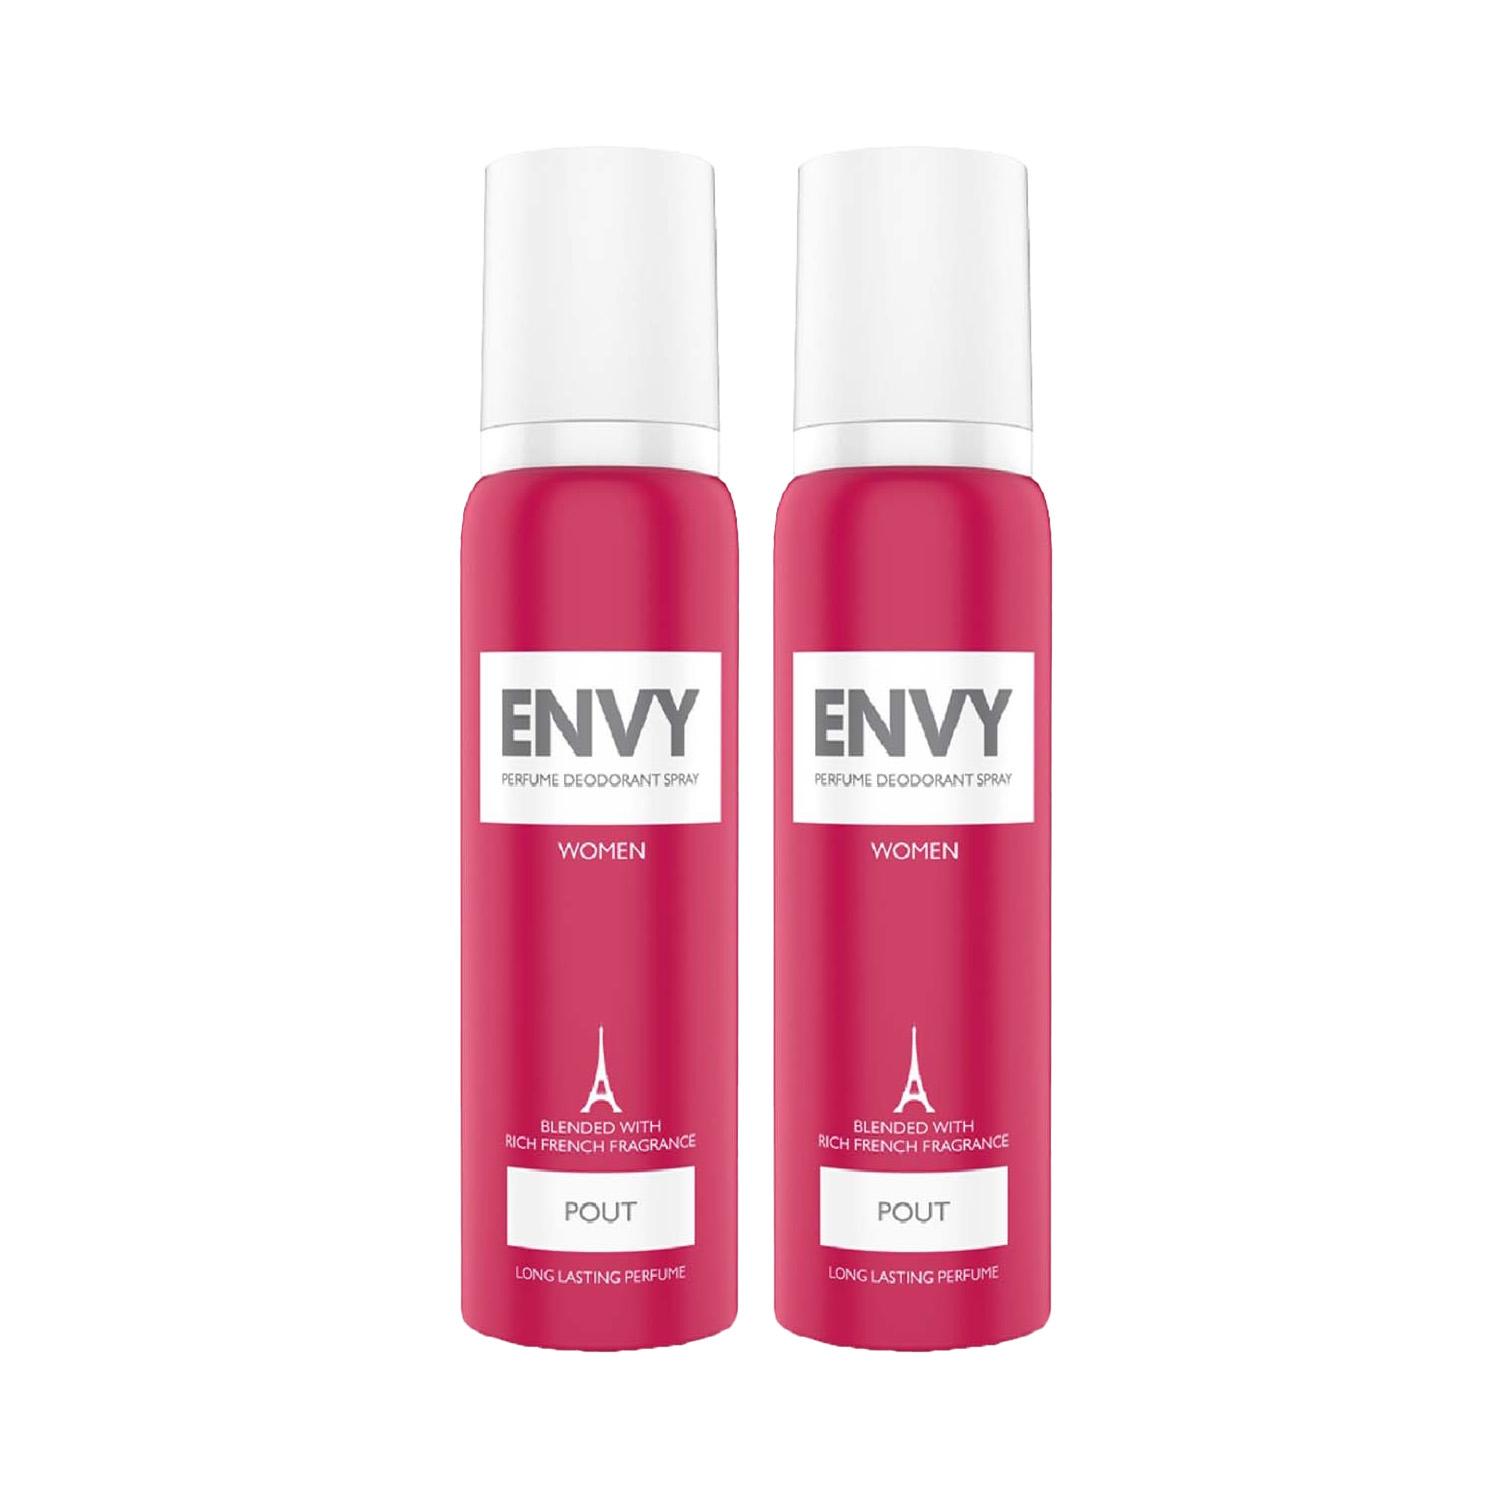 Envy Pout Deodorant For Women (120 ml) (Pack of 2) Combo